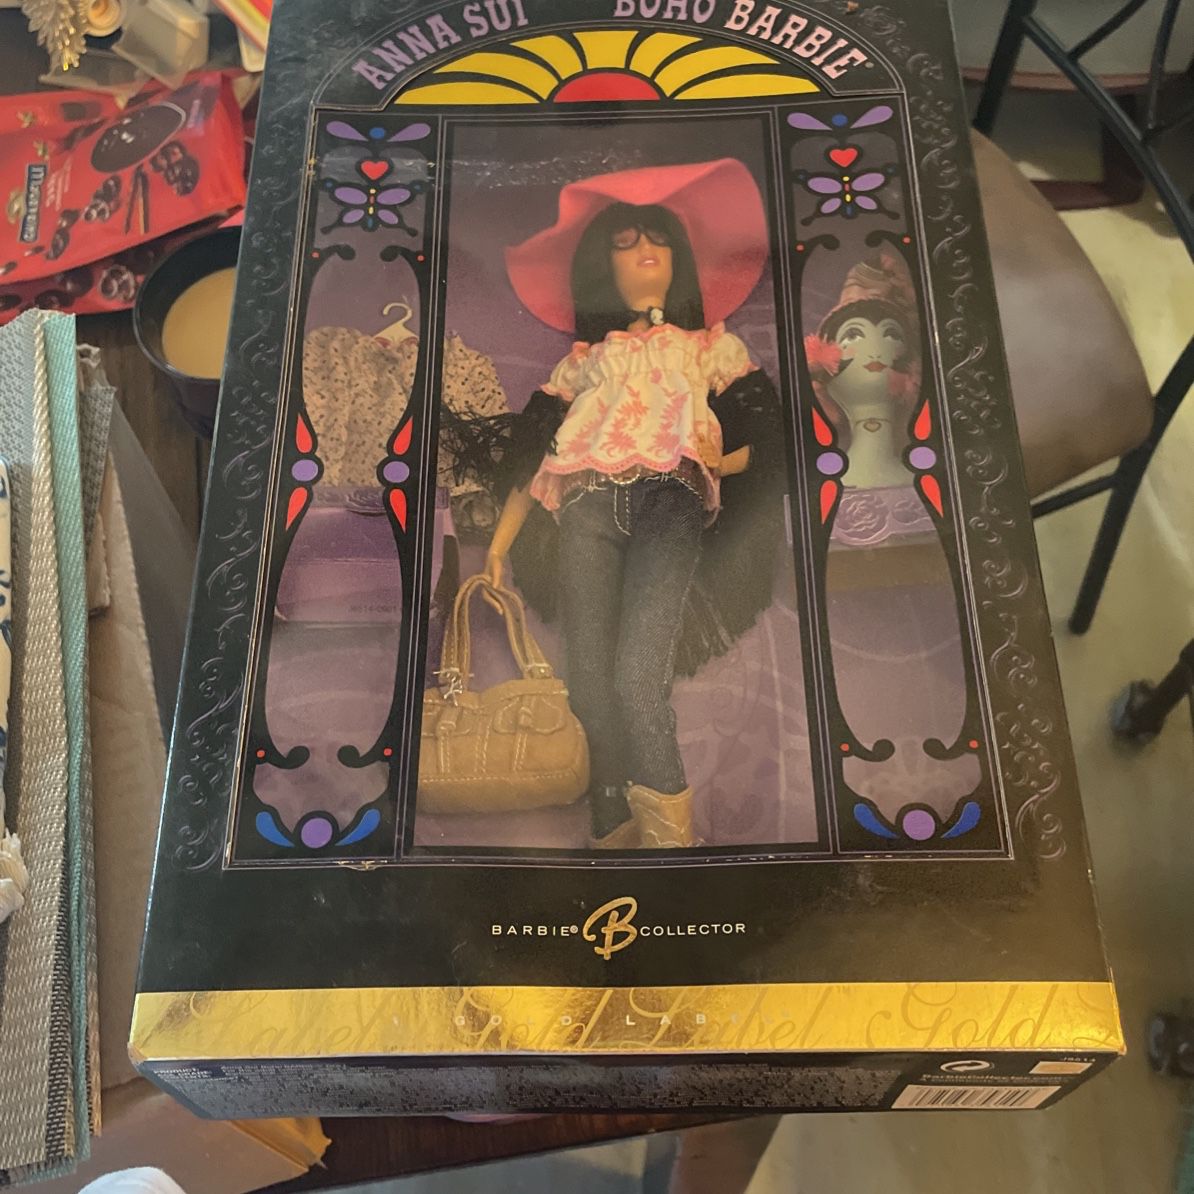 Gold Label Barbie Collector “Anna Sui Boho Barbie” for Sale in